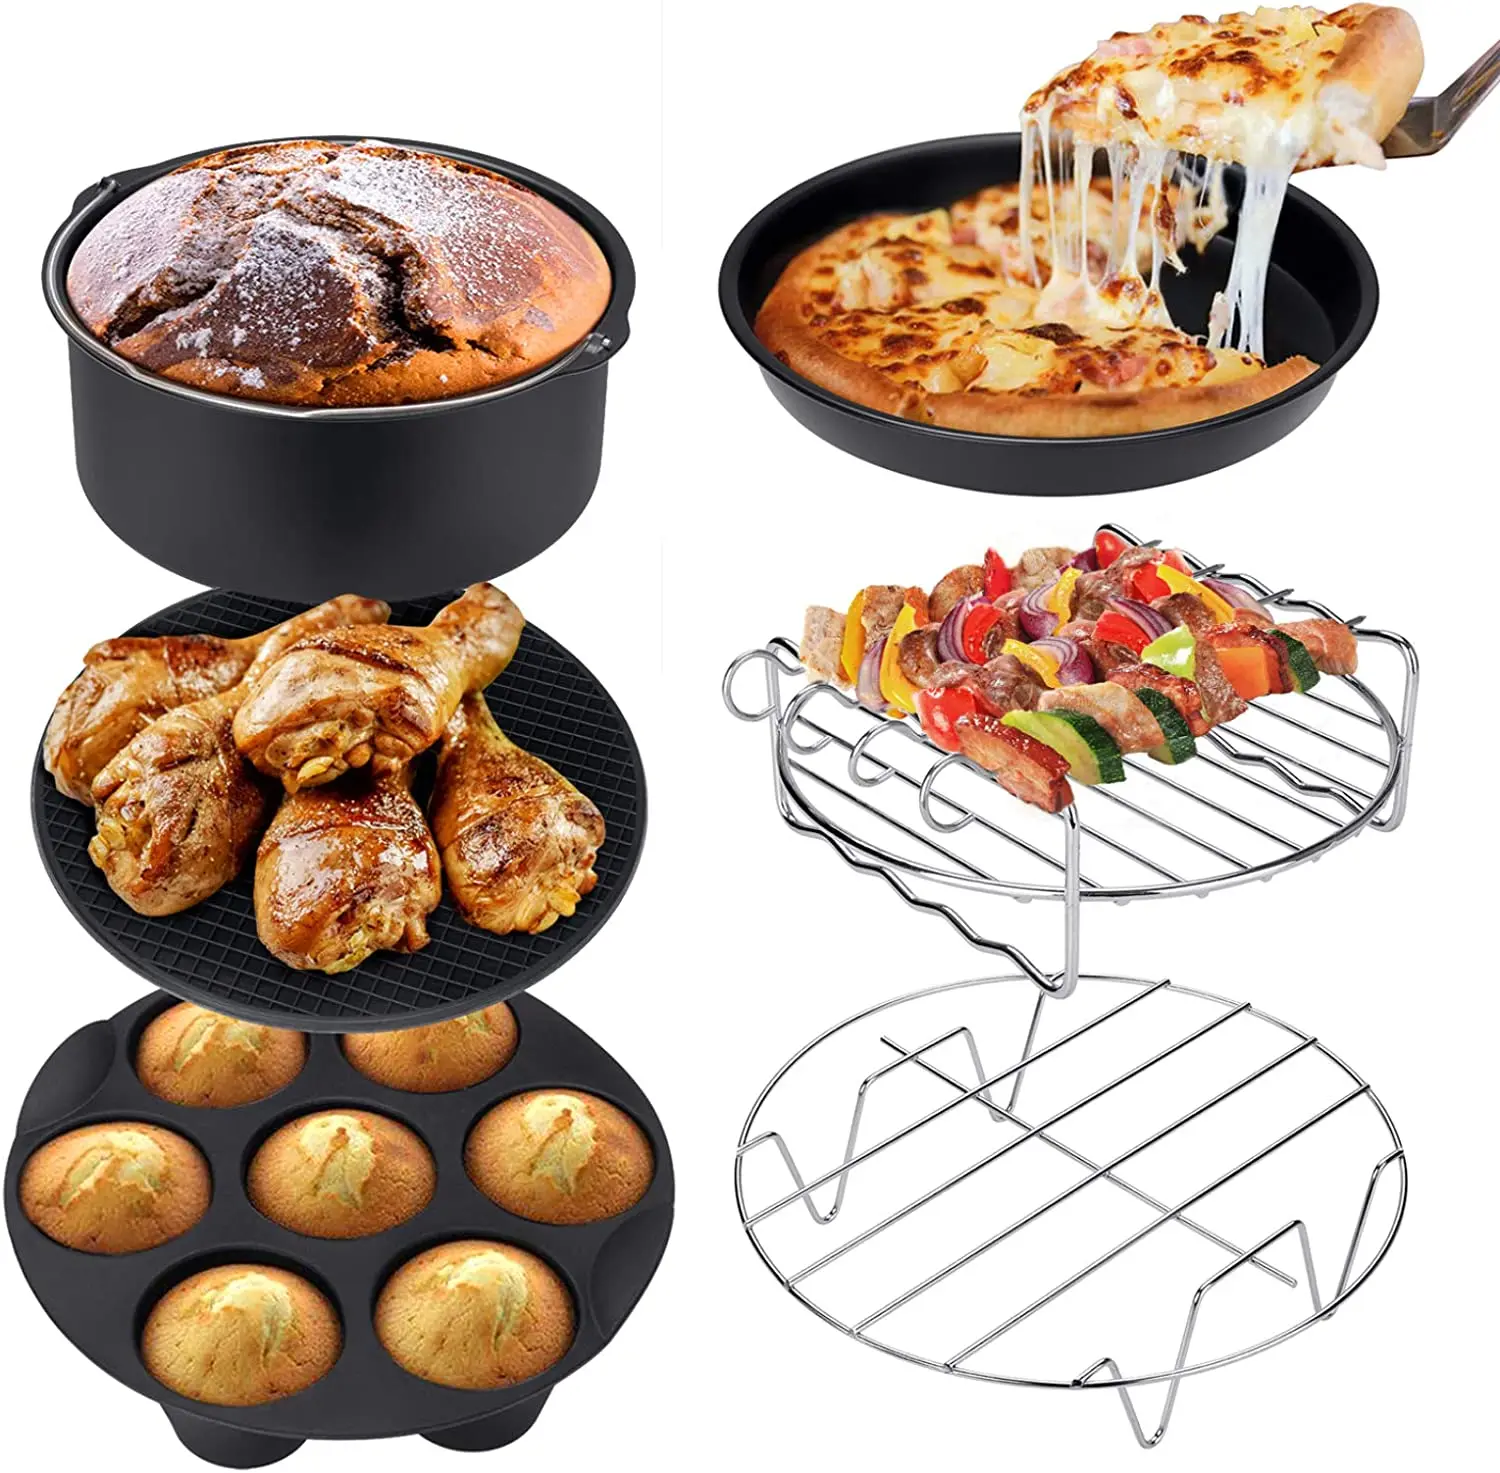 Air Fryer Accessories for COSORI and Other Square AirFryers, 5.5L with 8  Inch Cake Barrel, Pizza Pan, Skewer Rack - AliExpress